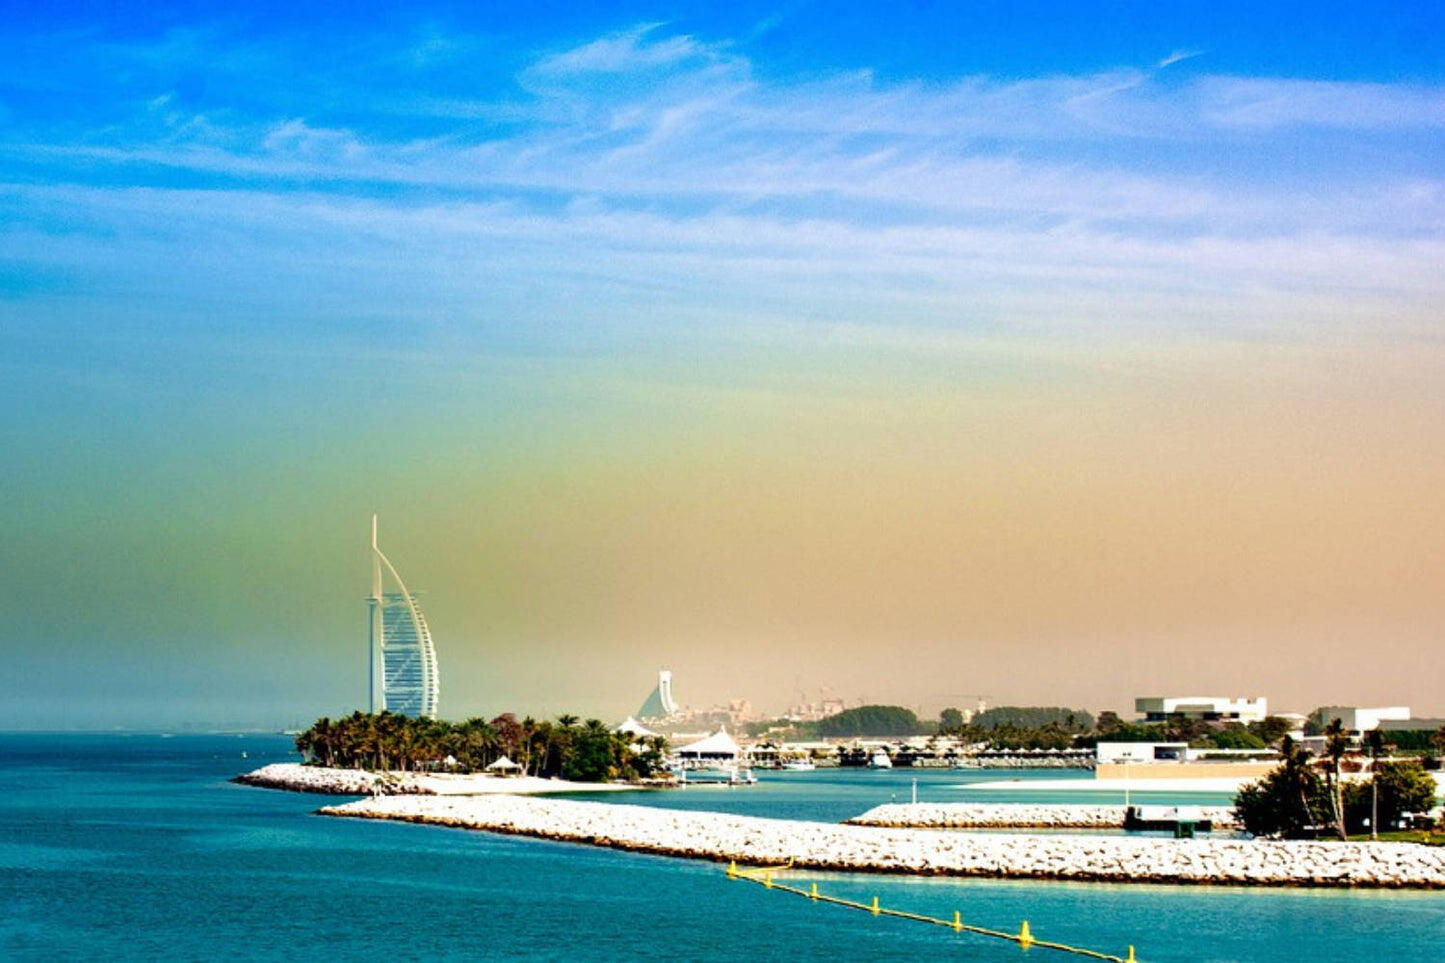 Our Top 5 Picks For The Best Free Beaches In Dubai